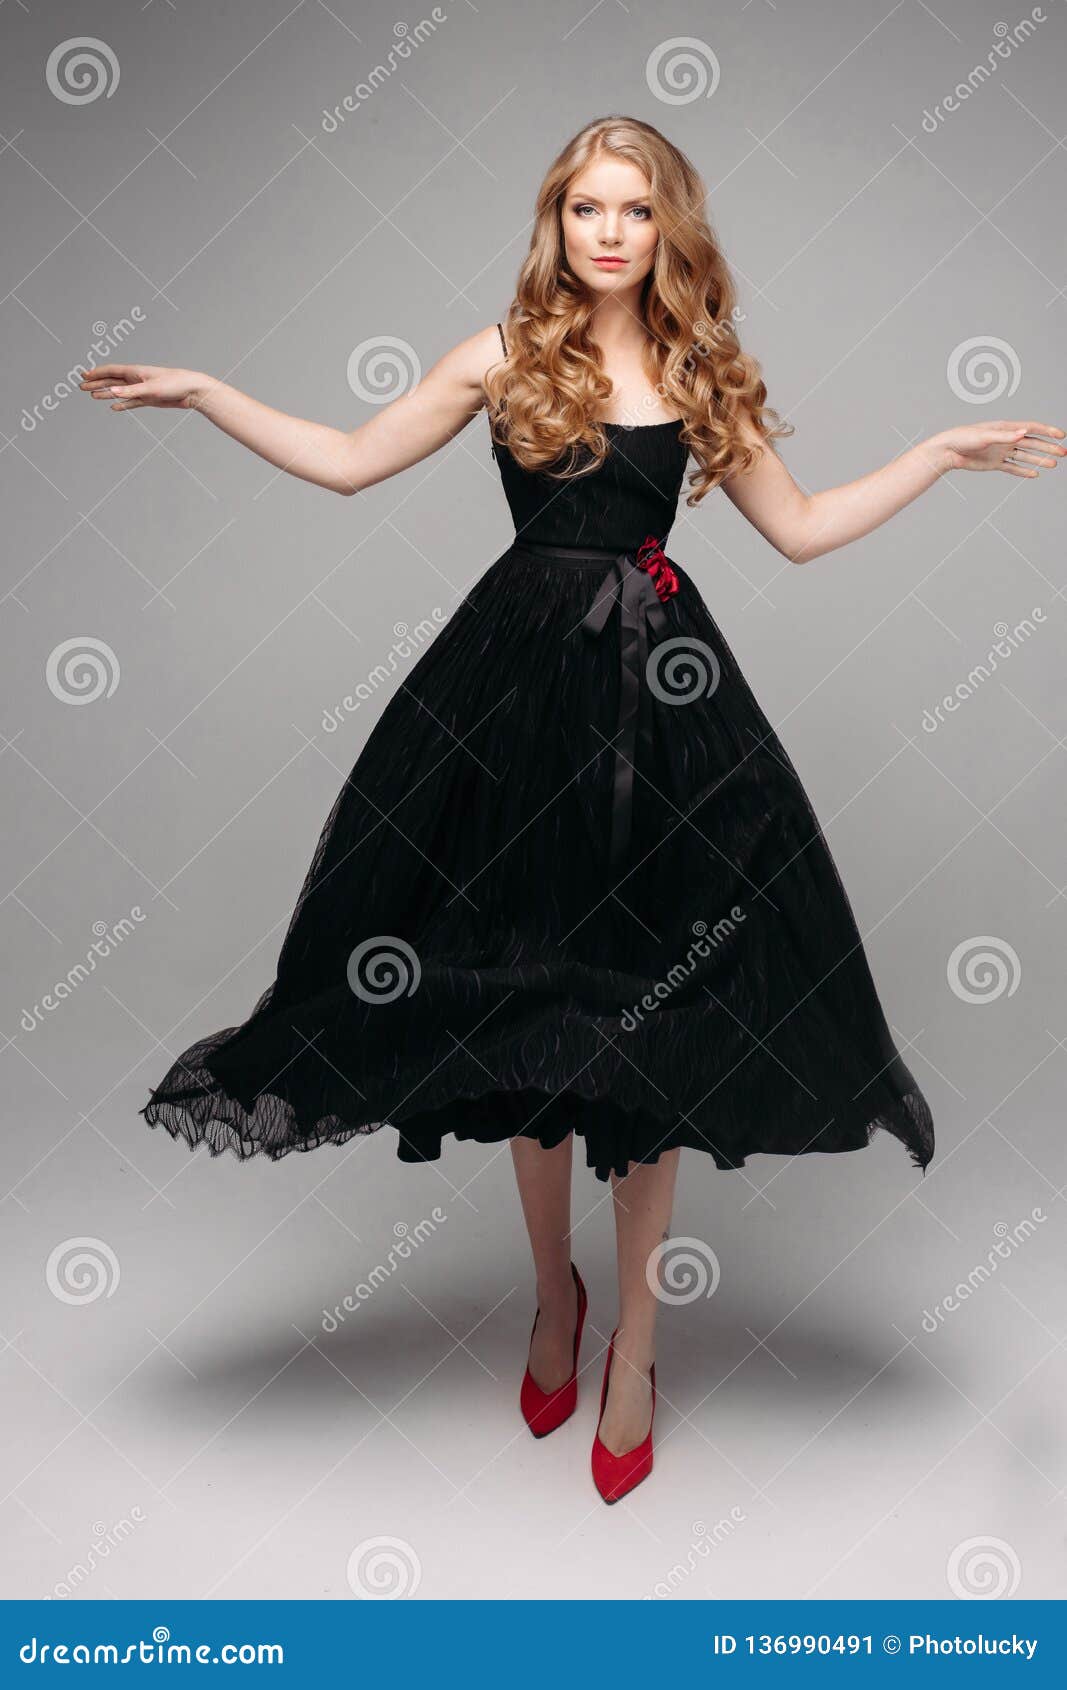 En del bande Sanctuary Beautiful Girl with Red Hair in Black Dress and Red Heels Stock Image -  Image of stunning, event: 136990491